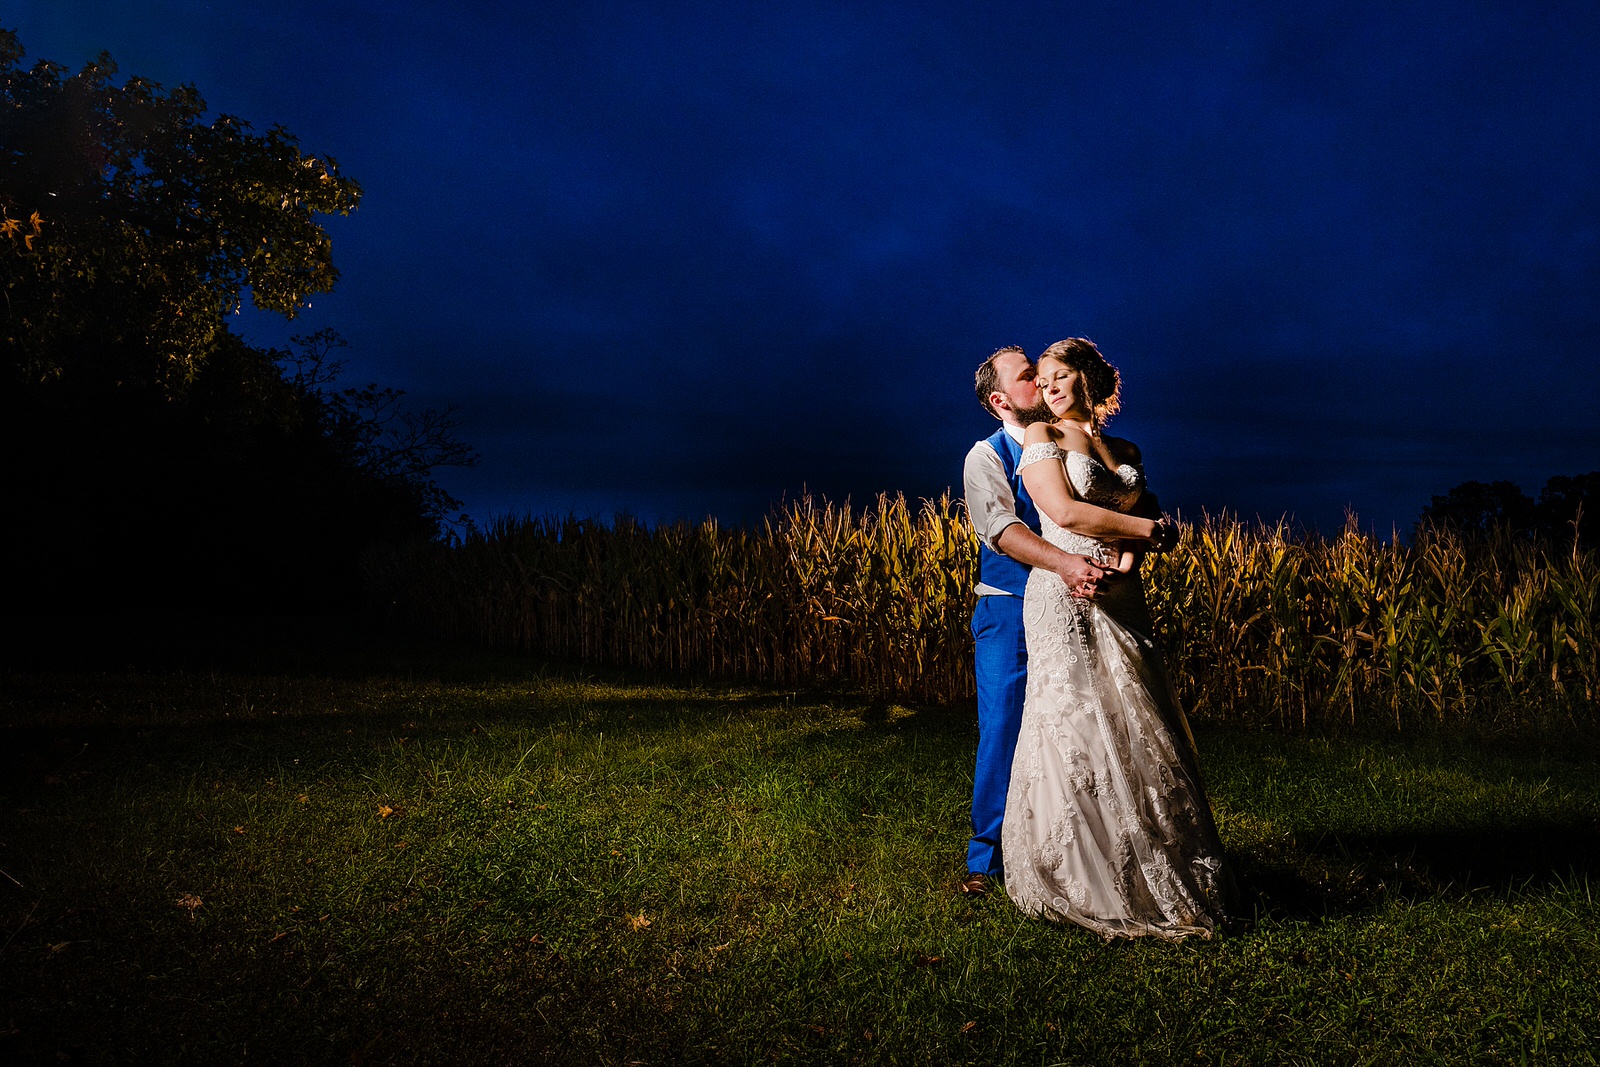 Bride and groom pose for a dramatic portrait at blue hour in a cornfield at their farm wedding